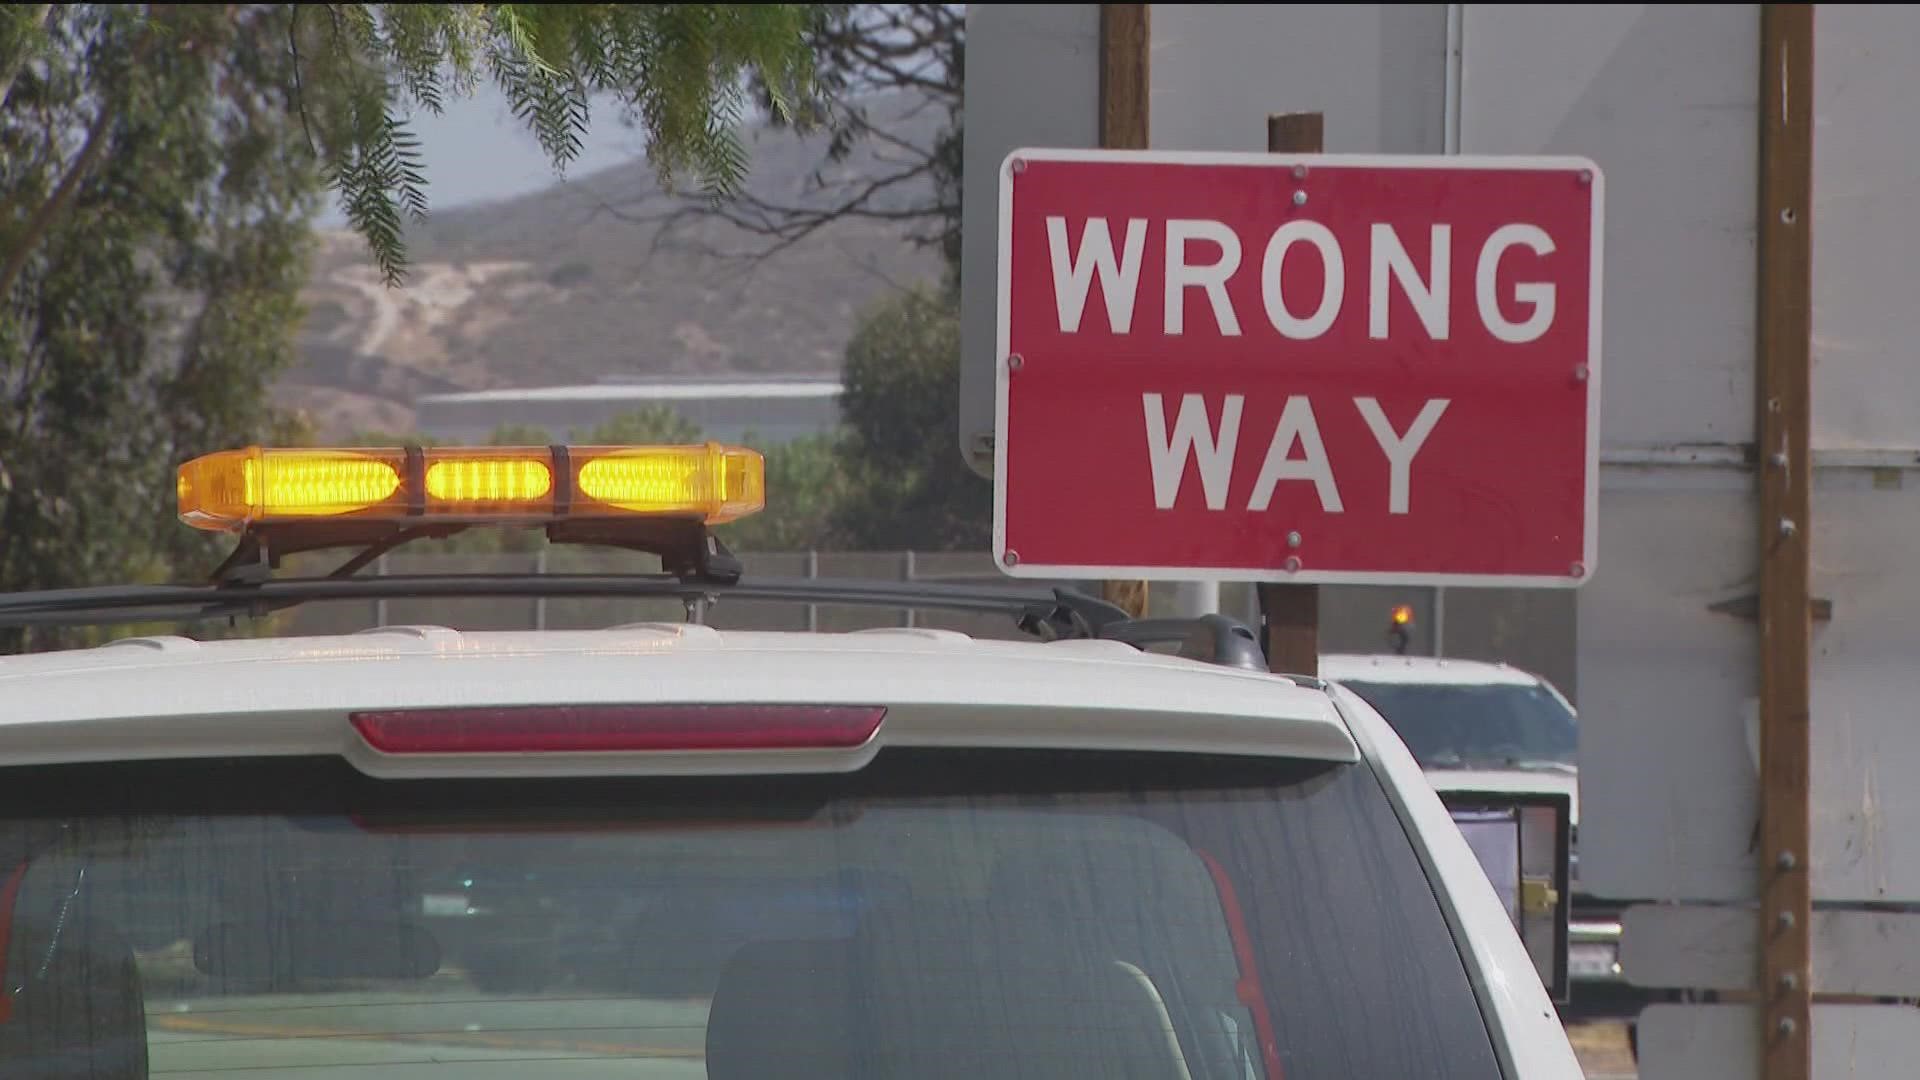 Caltrans has installed new ‘Advanced Detection & Notification Systems’ for wrong way drivers on three I-5 off-ramps in San Ysidro.